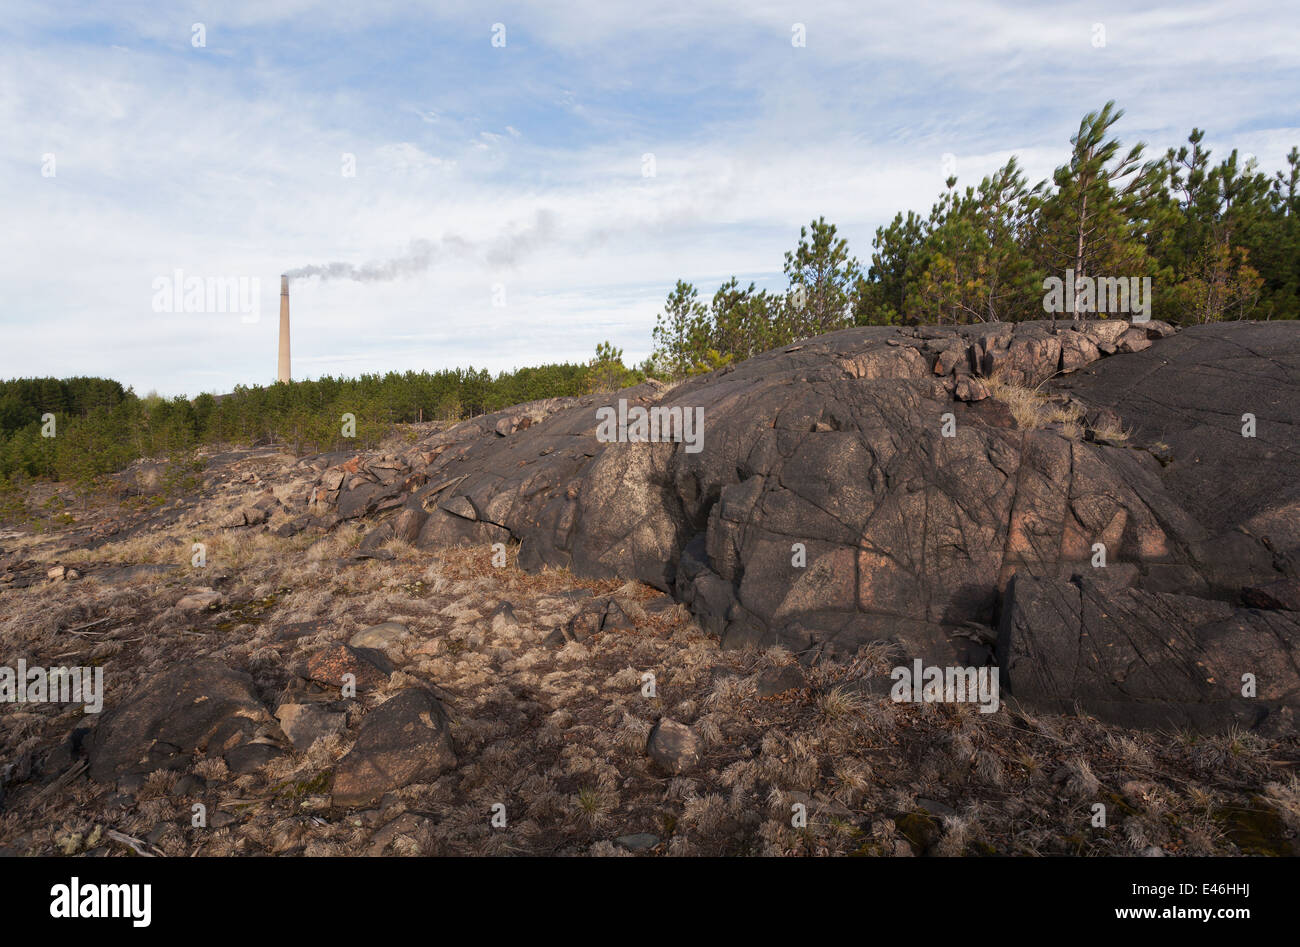 Pollution has blackened exposed rock in Sudbury near the Vale Mining operations. The Superstack can be seen in the distance. Stock Photo